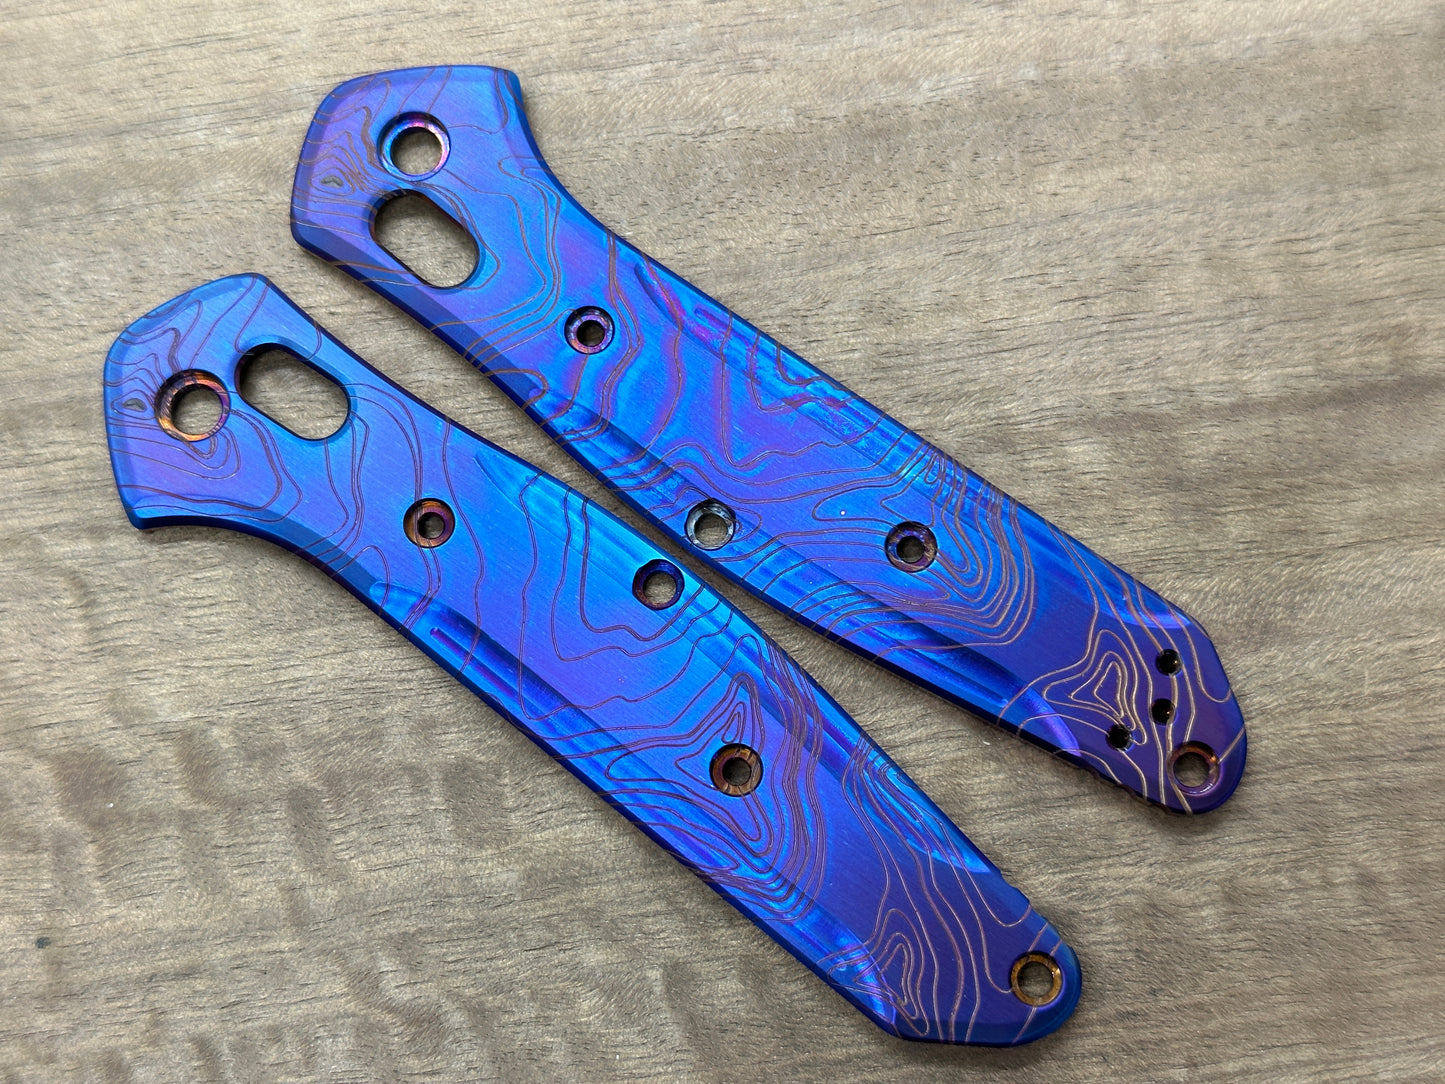 Flamed TOPO engraved Titanium Scales for Benchmade 940 Osborne